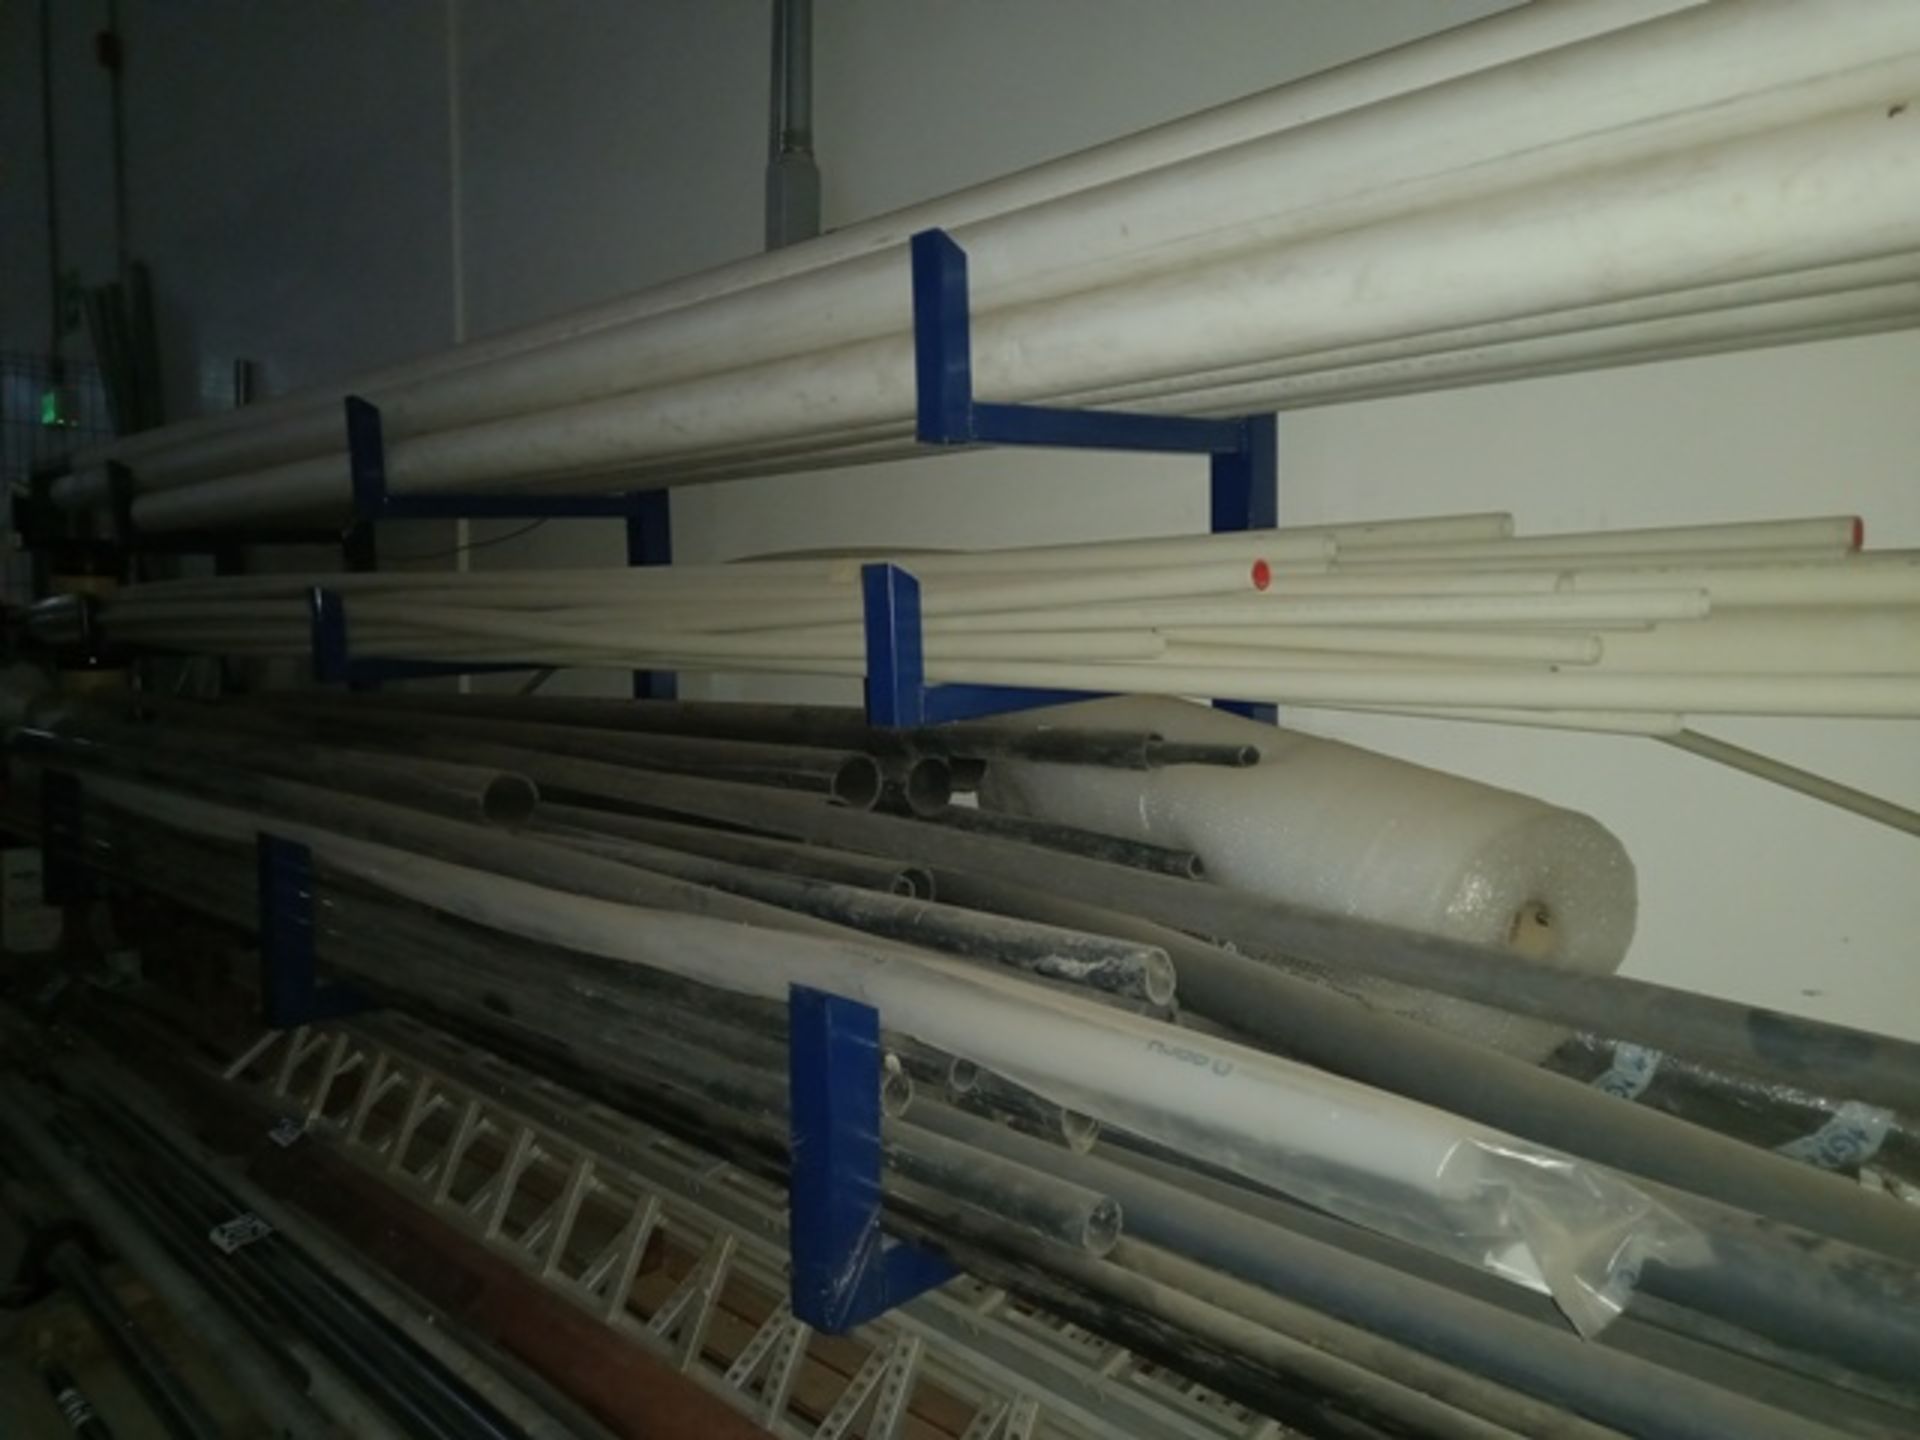 Lot of (1) Metallic Rack with Hydraulic PVC Pipe, Different Sizes (1" - 4") - Image 6 of 7